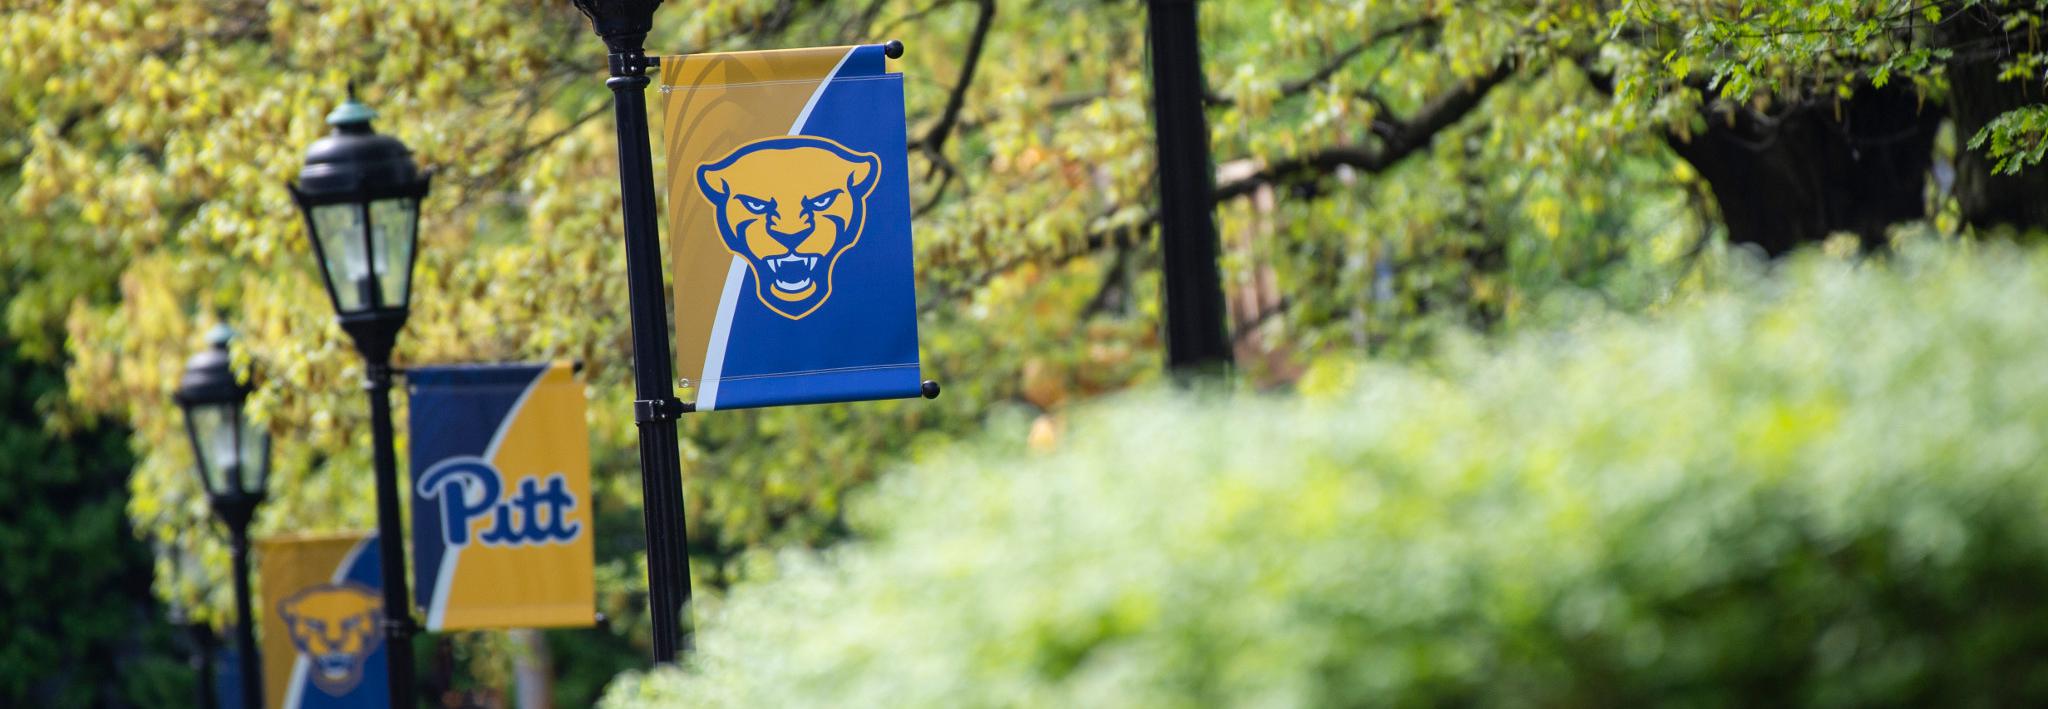 Pitt banners on campus